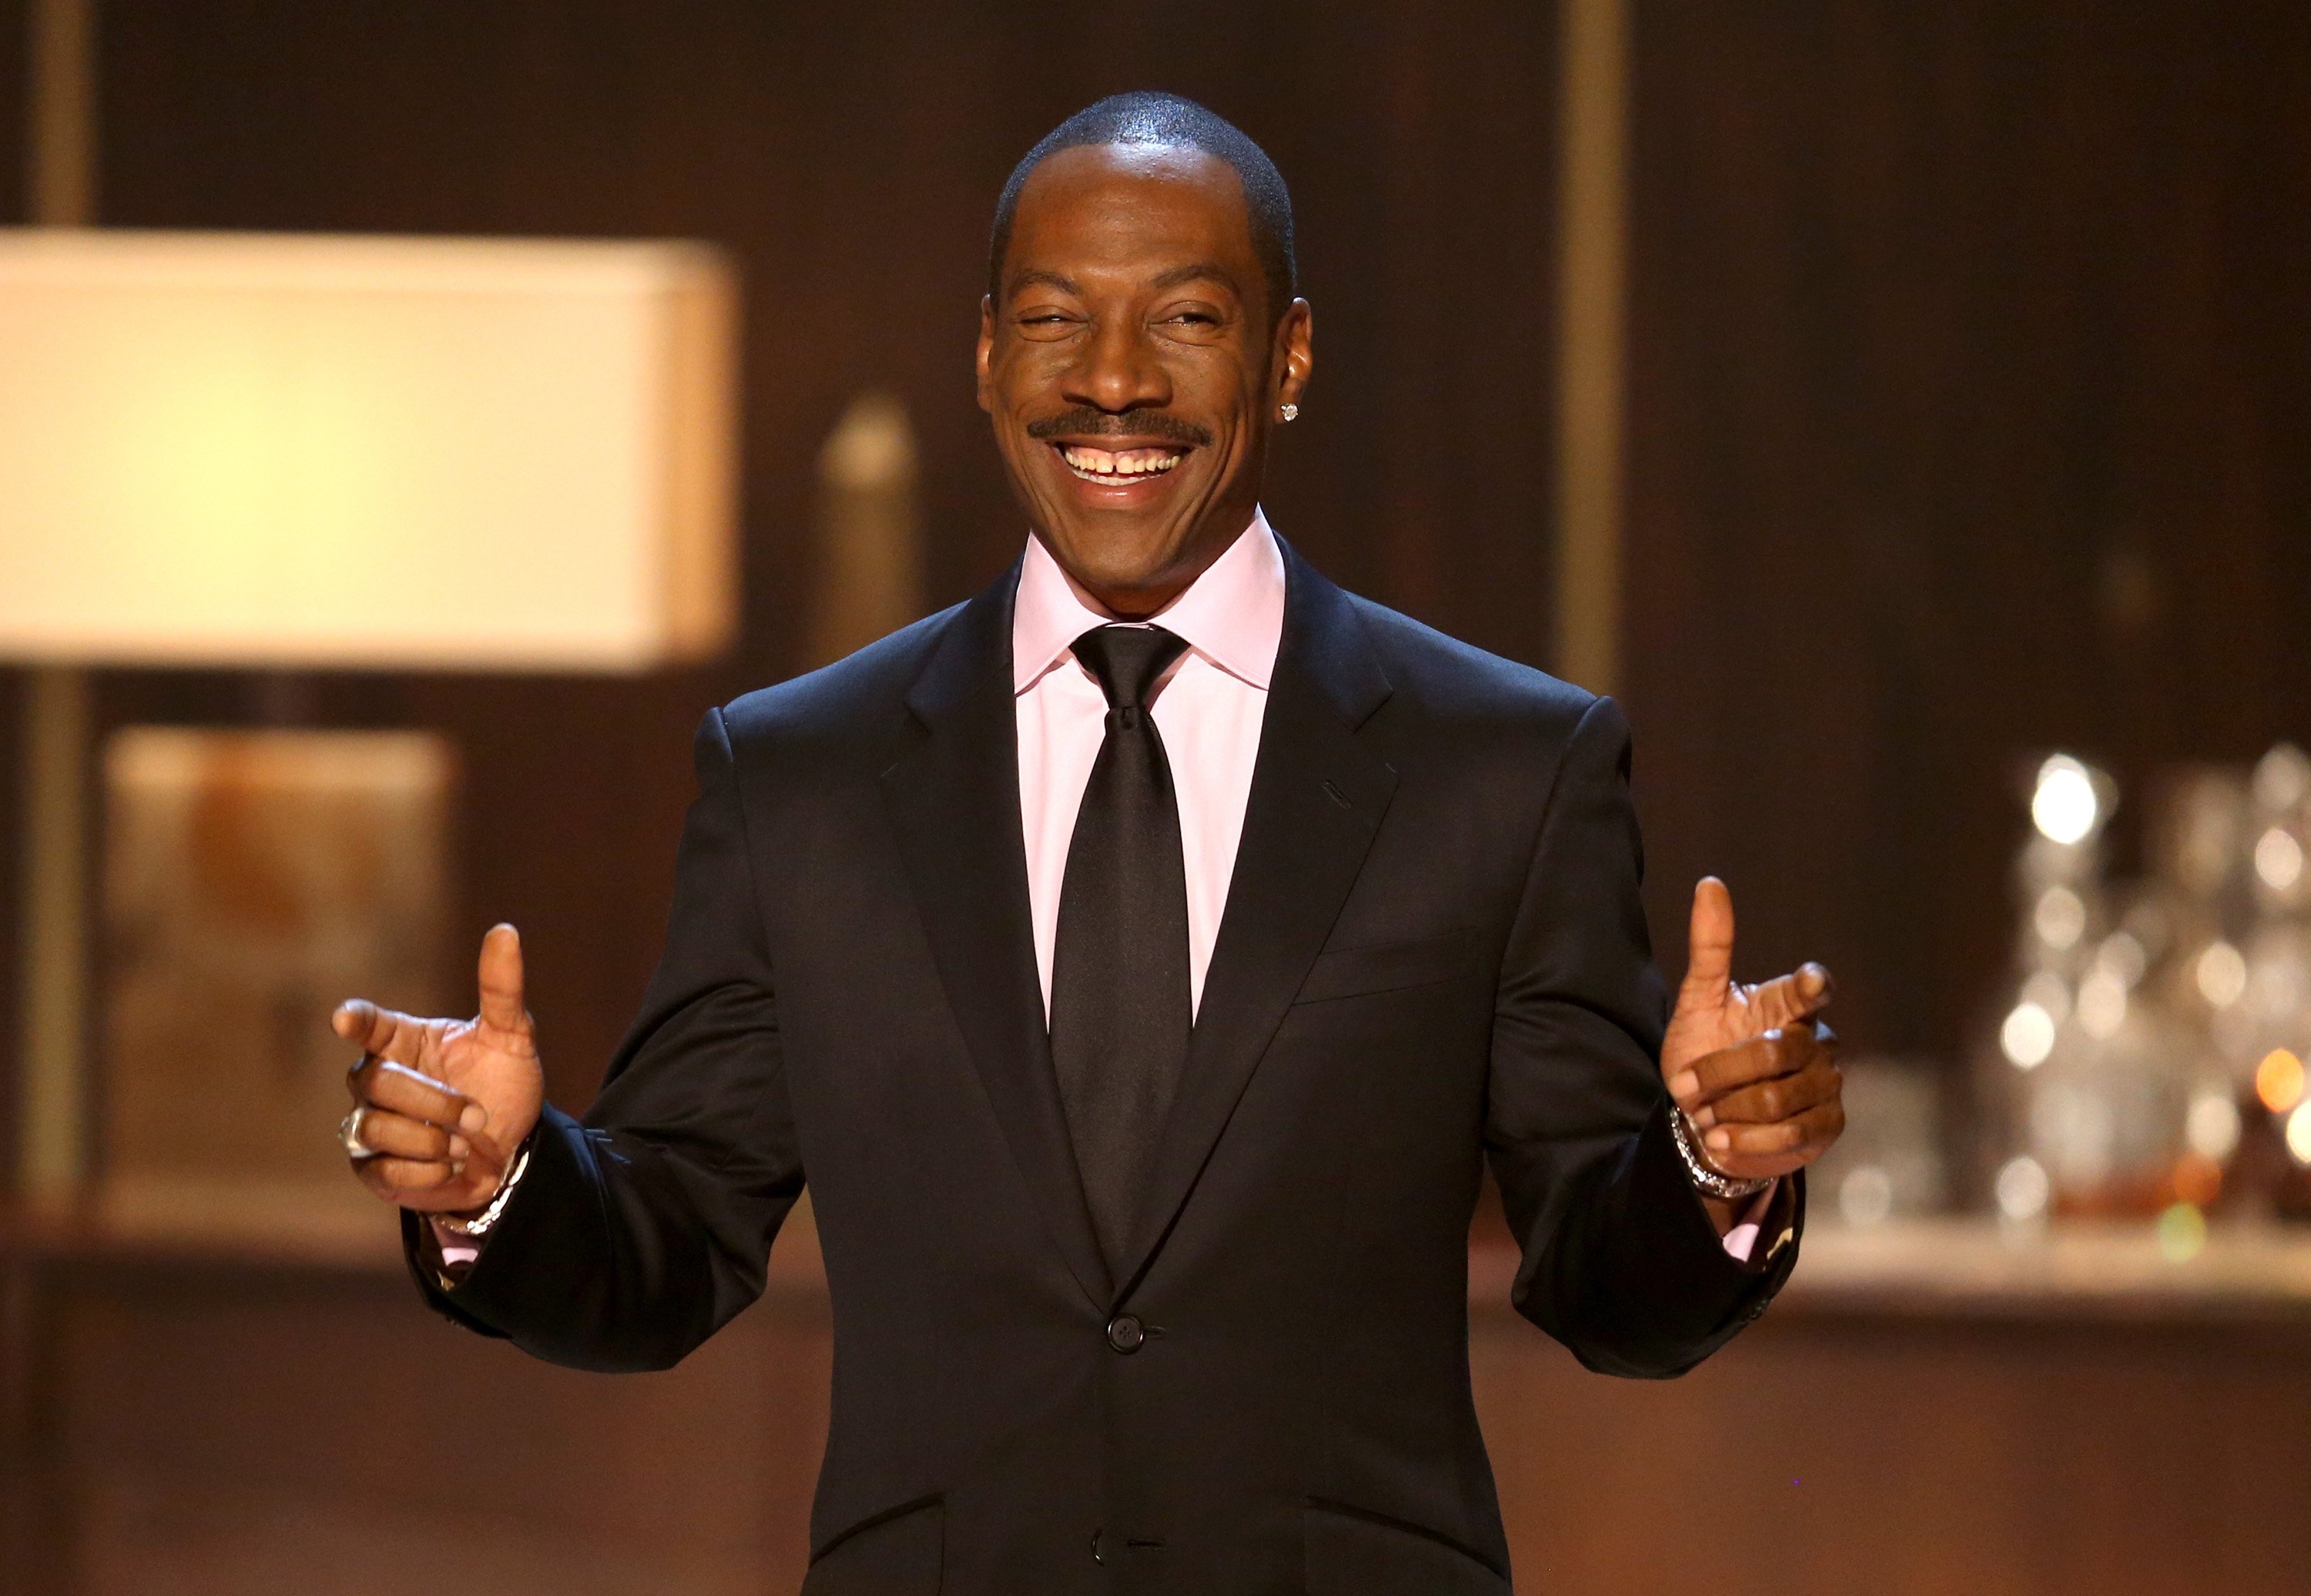 Eddie Murphy at "Eddie Murphy: One Night Only" on November 3, 2012 in California | Photo: Getty Images